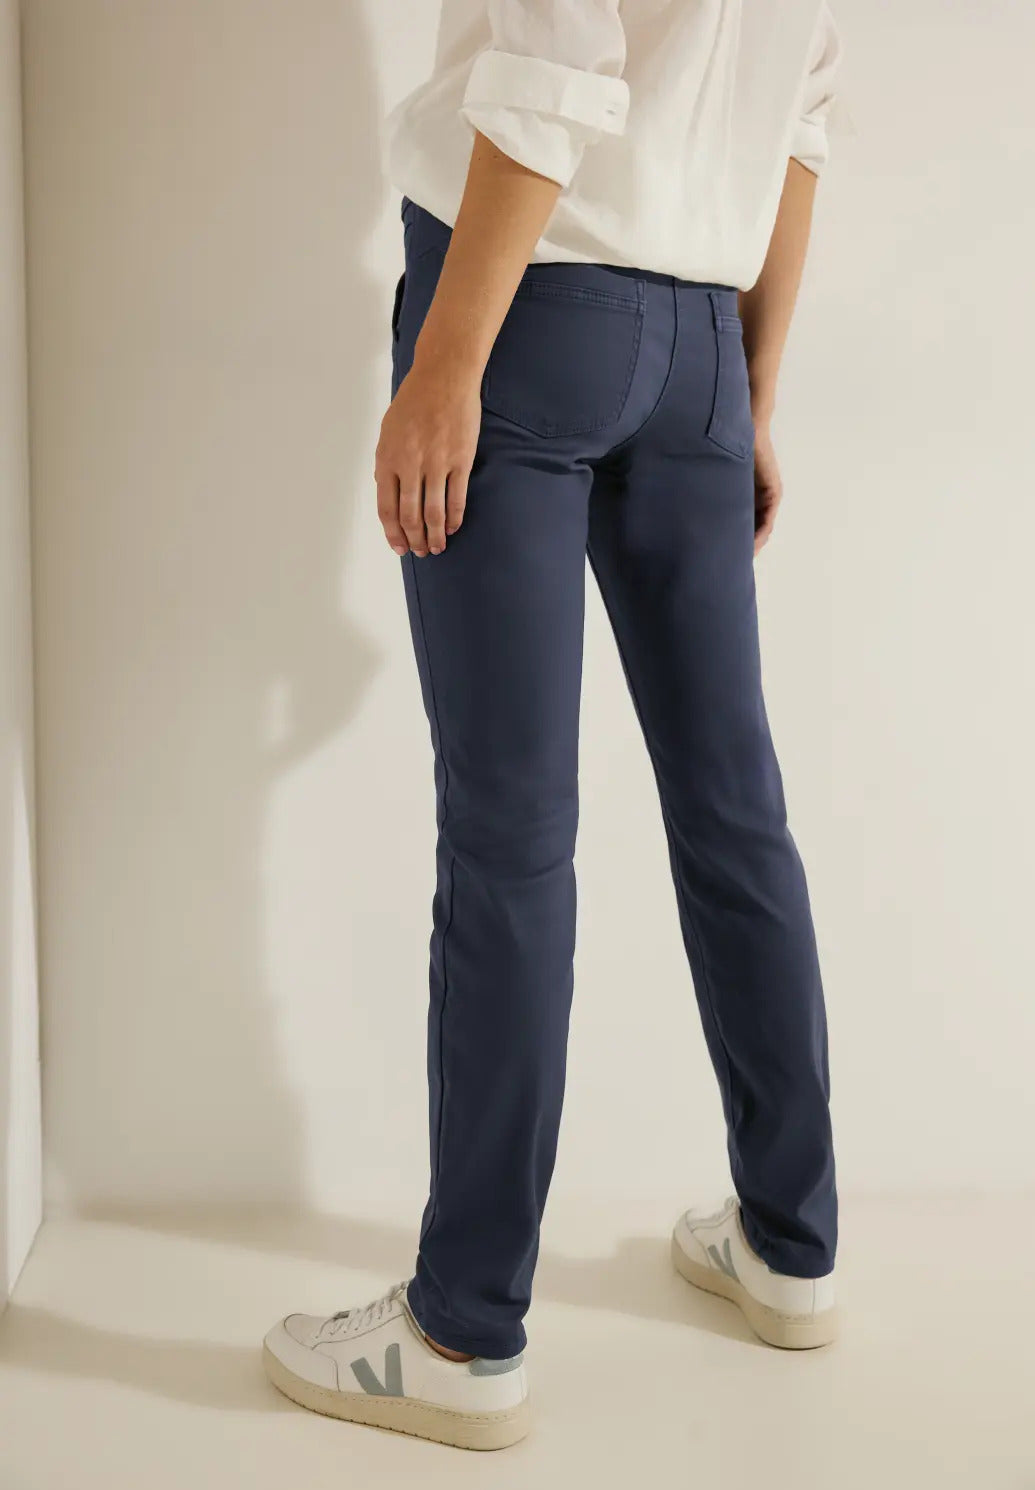 Cecil - Coated Pants - 376831